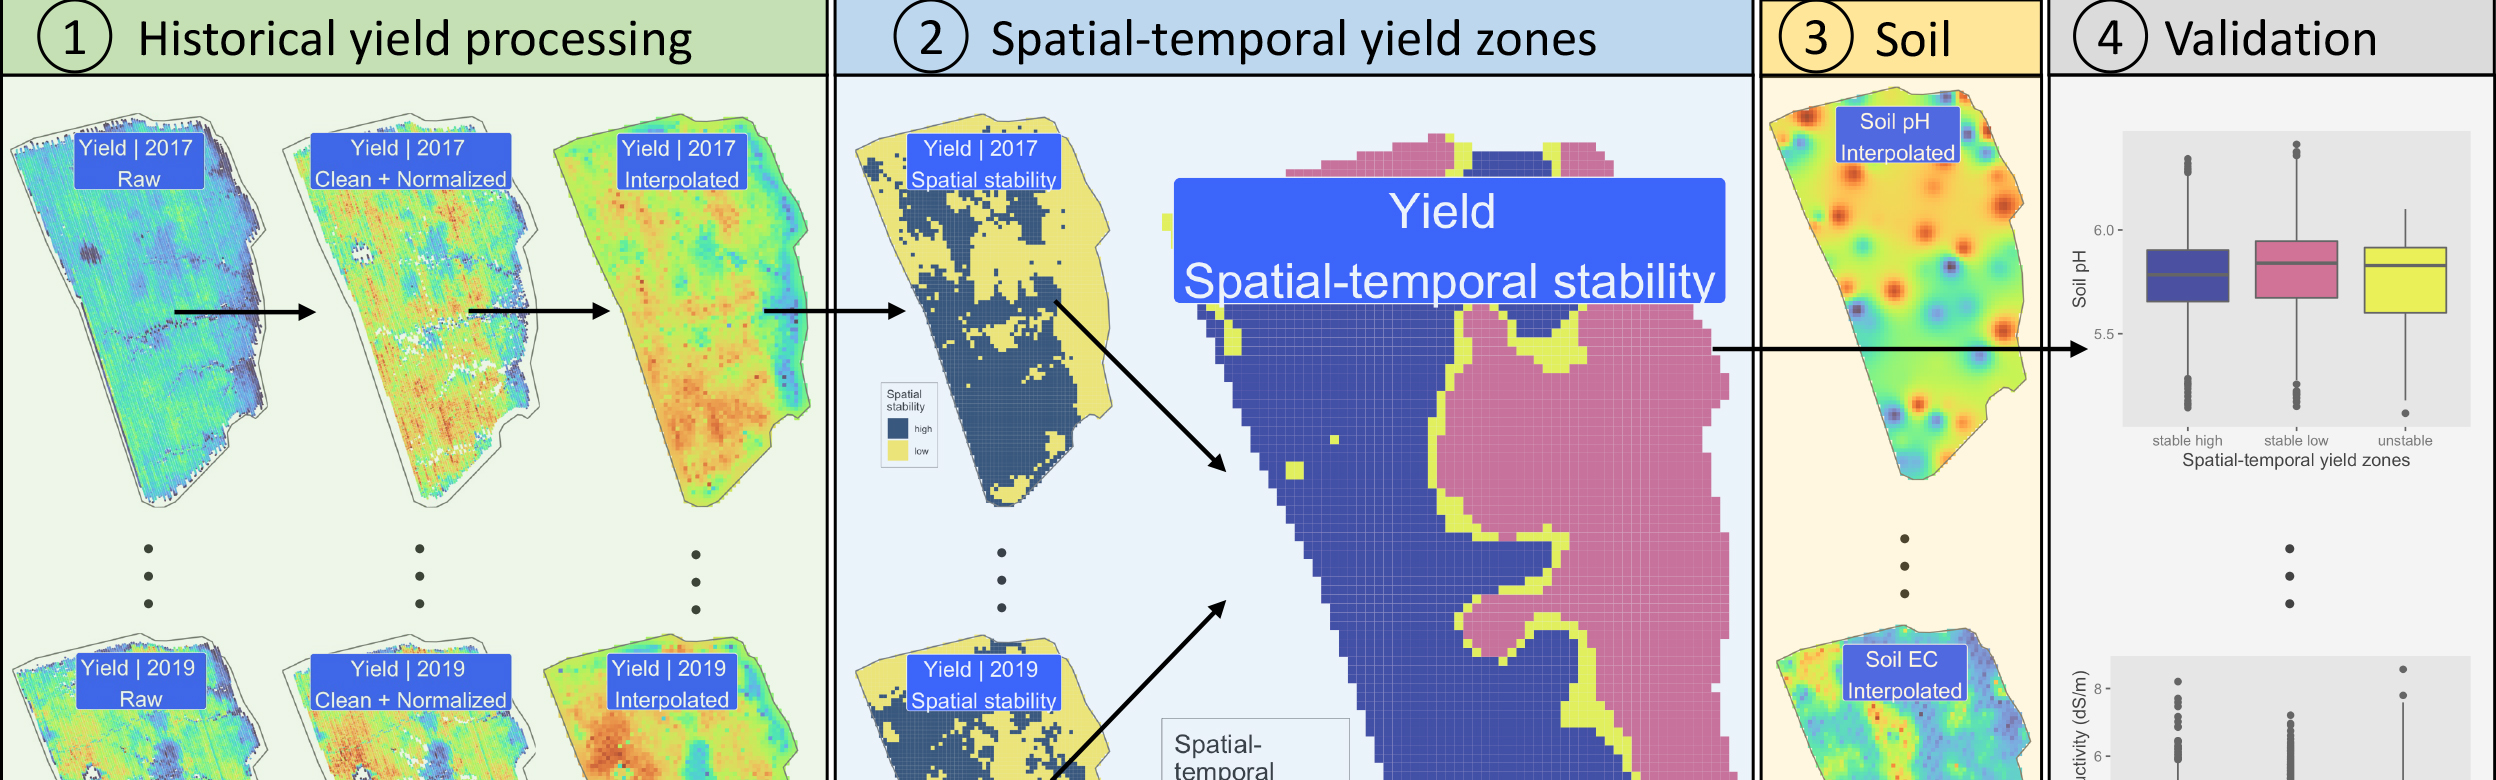 Graphics showing temporal yield zones